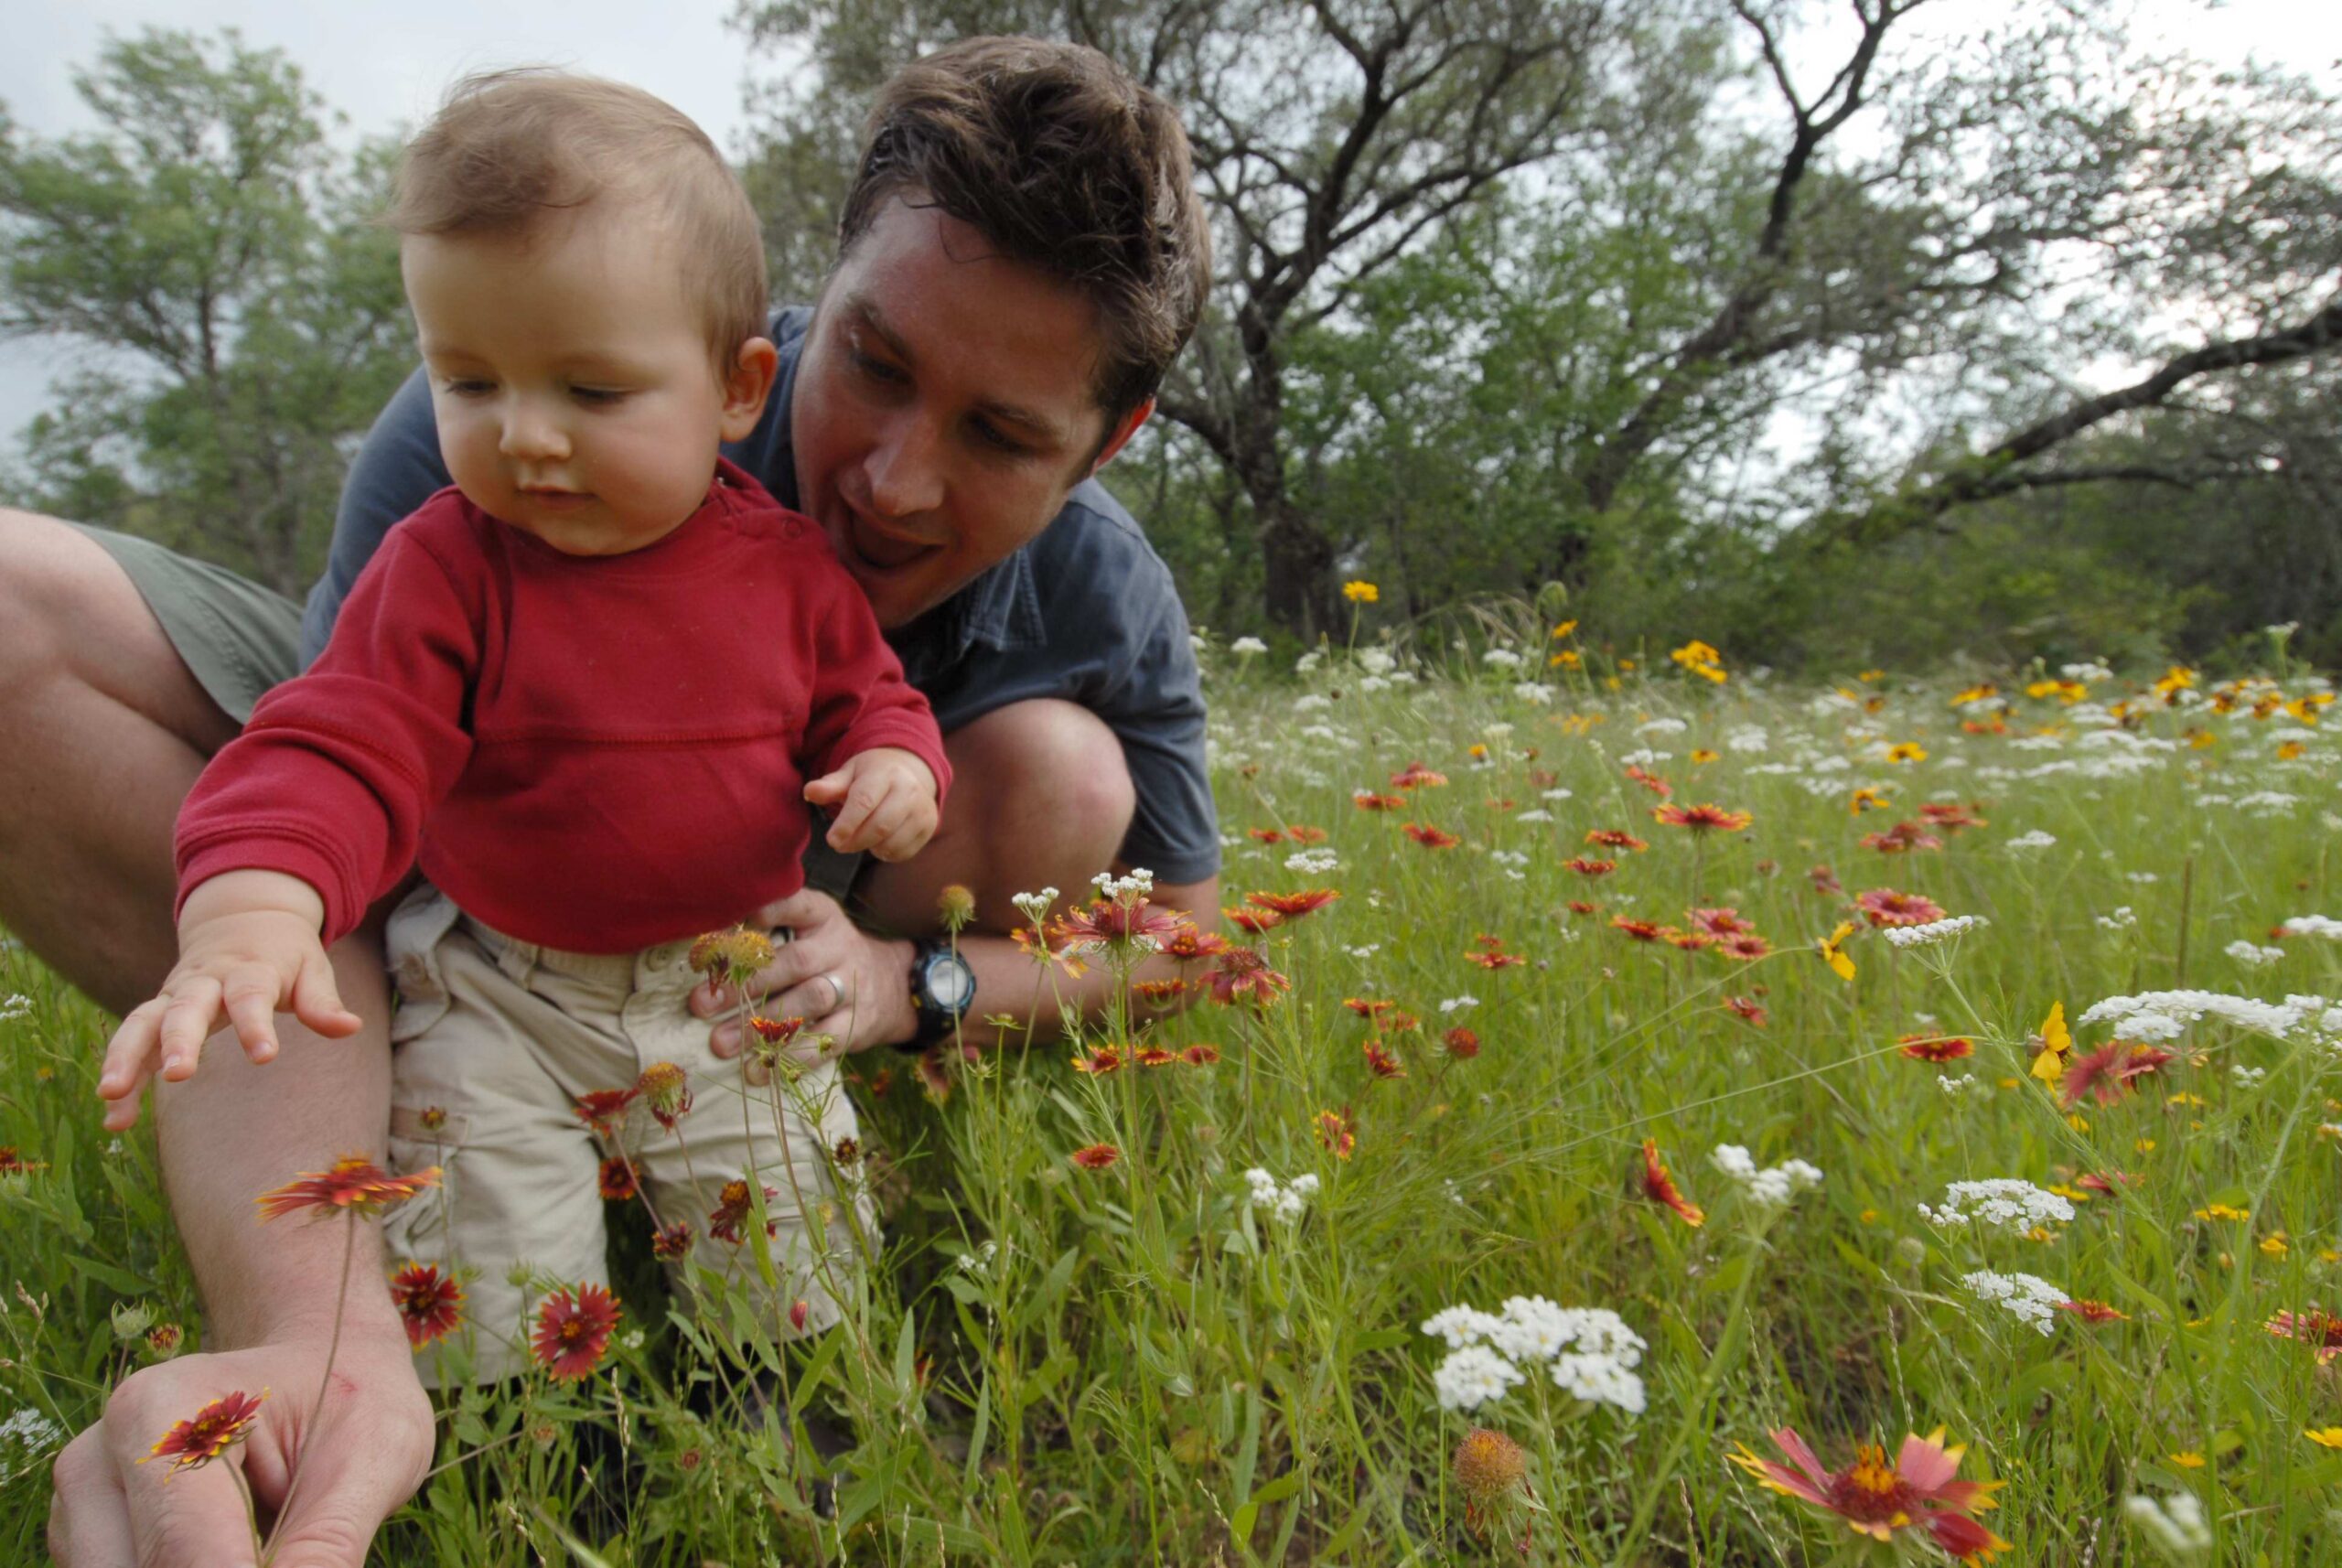 A man and a baby in a field of wildflowers.